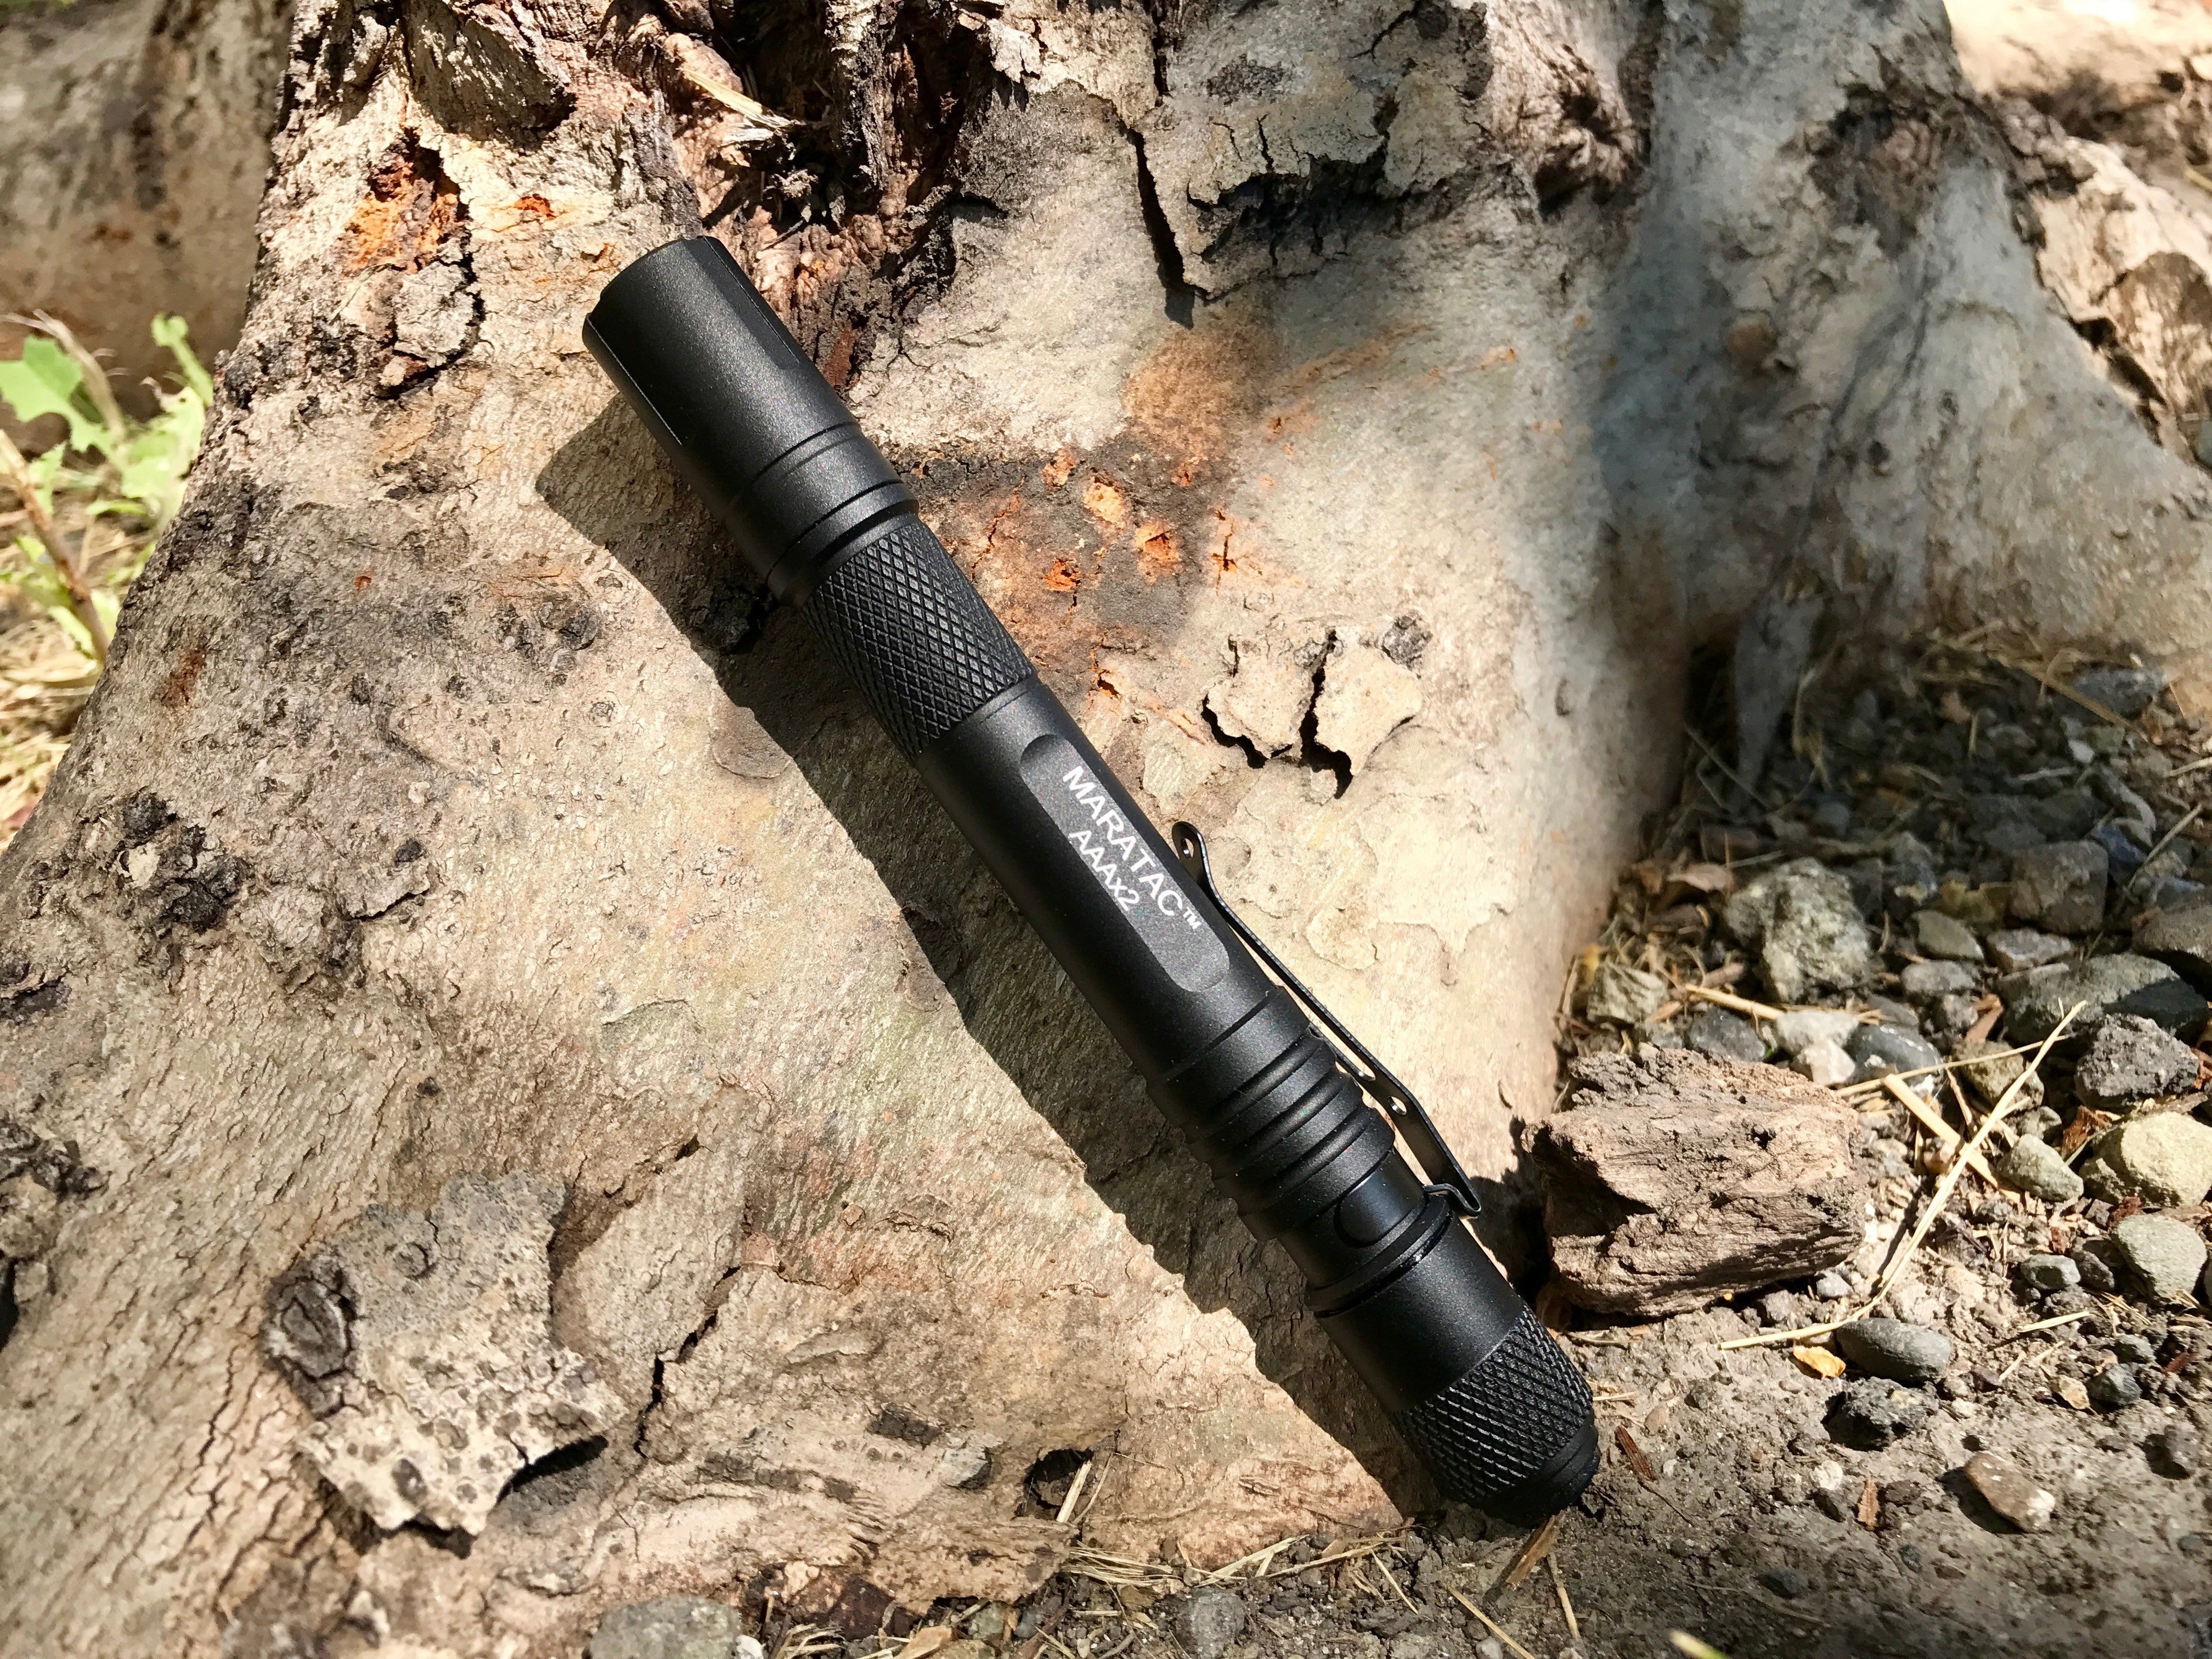 Inspection : AAAx2 Extreme  - Tactical Light by Maratac® Rev 3 ( ULTRA SLIM! )